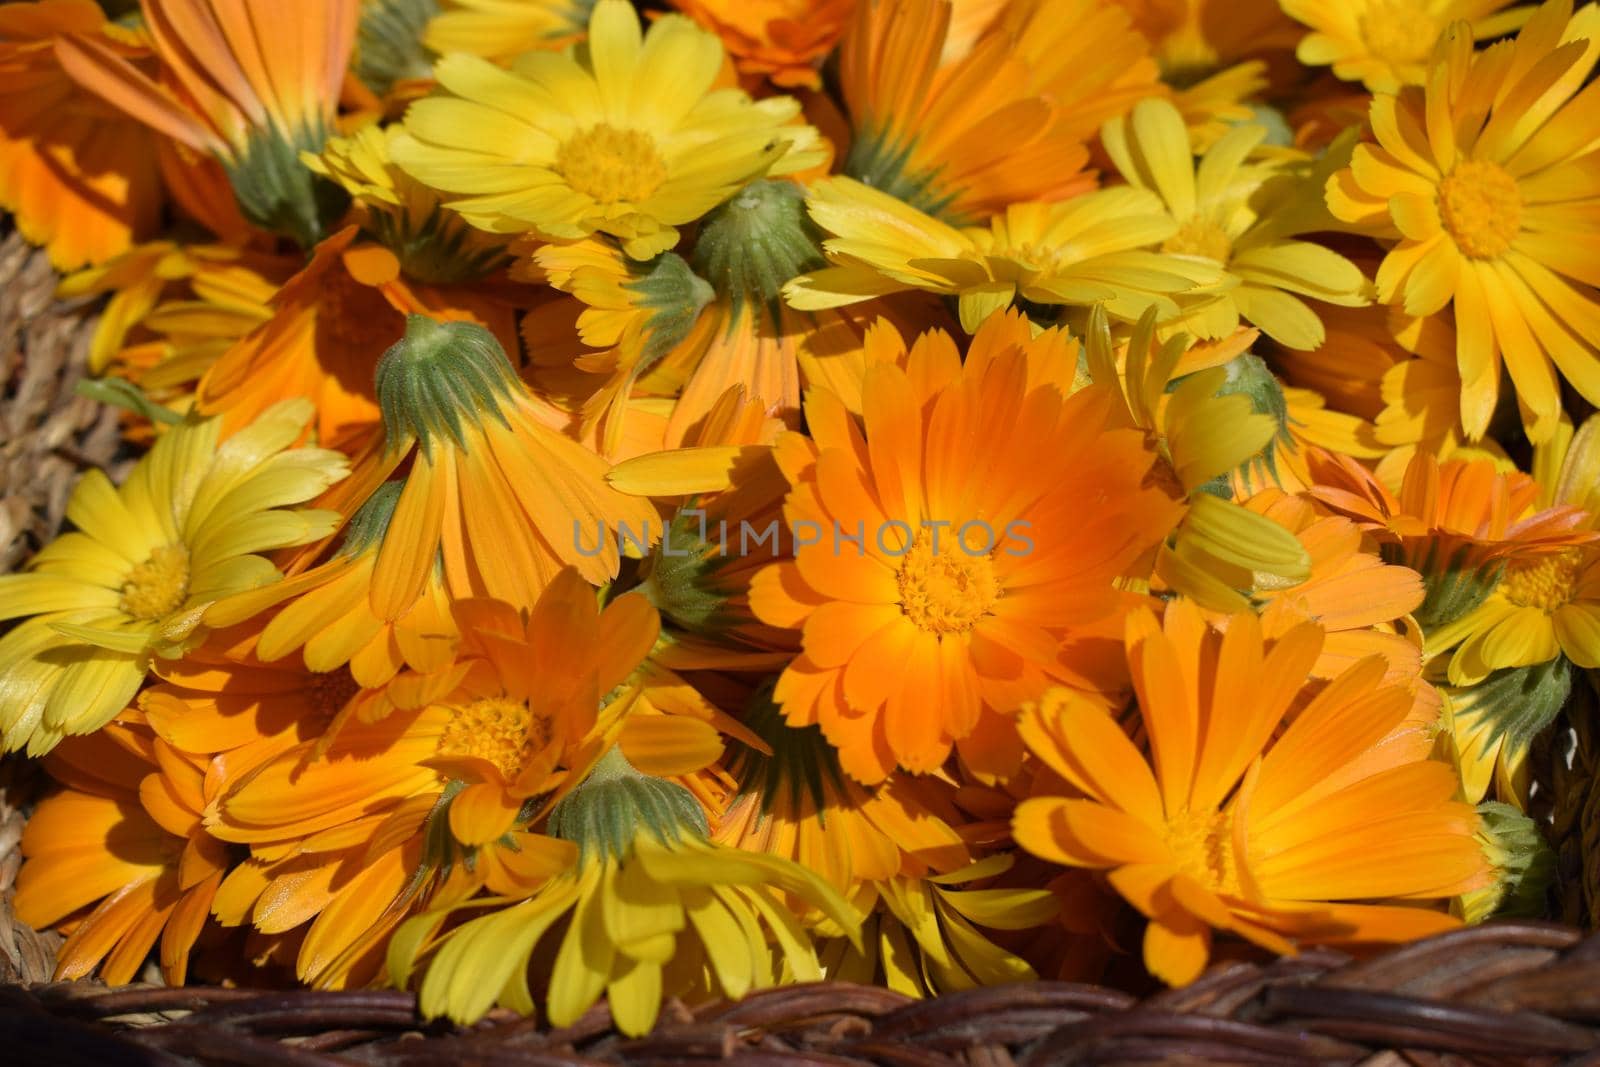 Background with Calendula. Medicinal herbs. Summer. Yellow and orange marigold flowers in the sunlight. Calendula flower, medicine herb, organic plant background. Alternative medicine concept